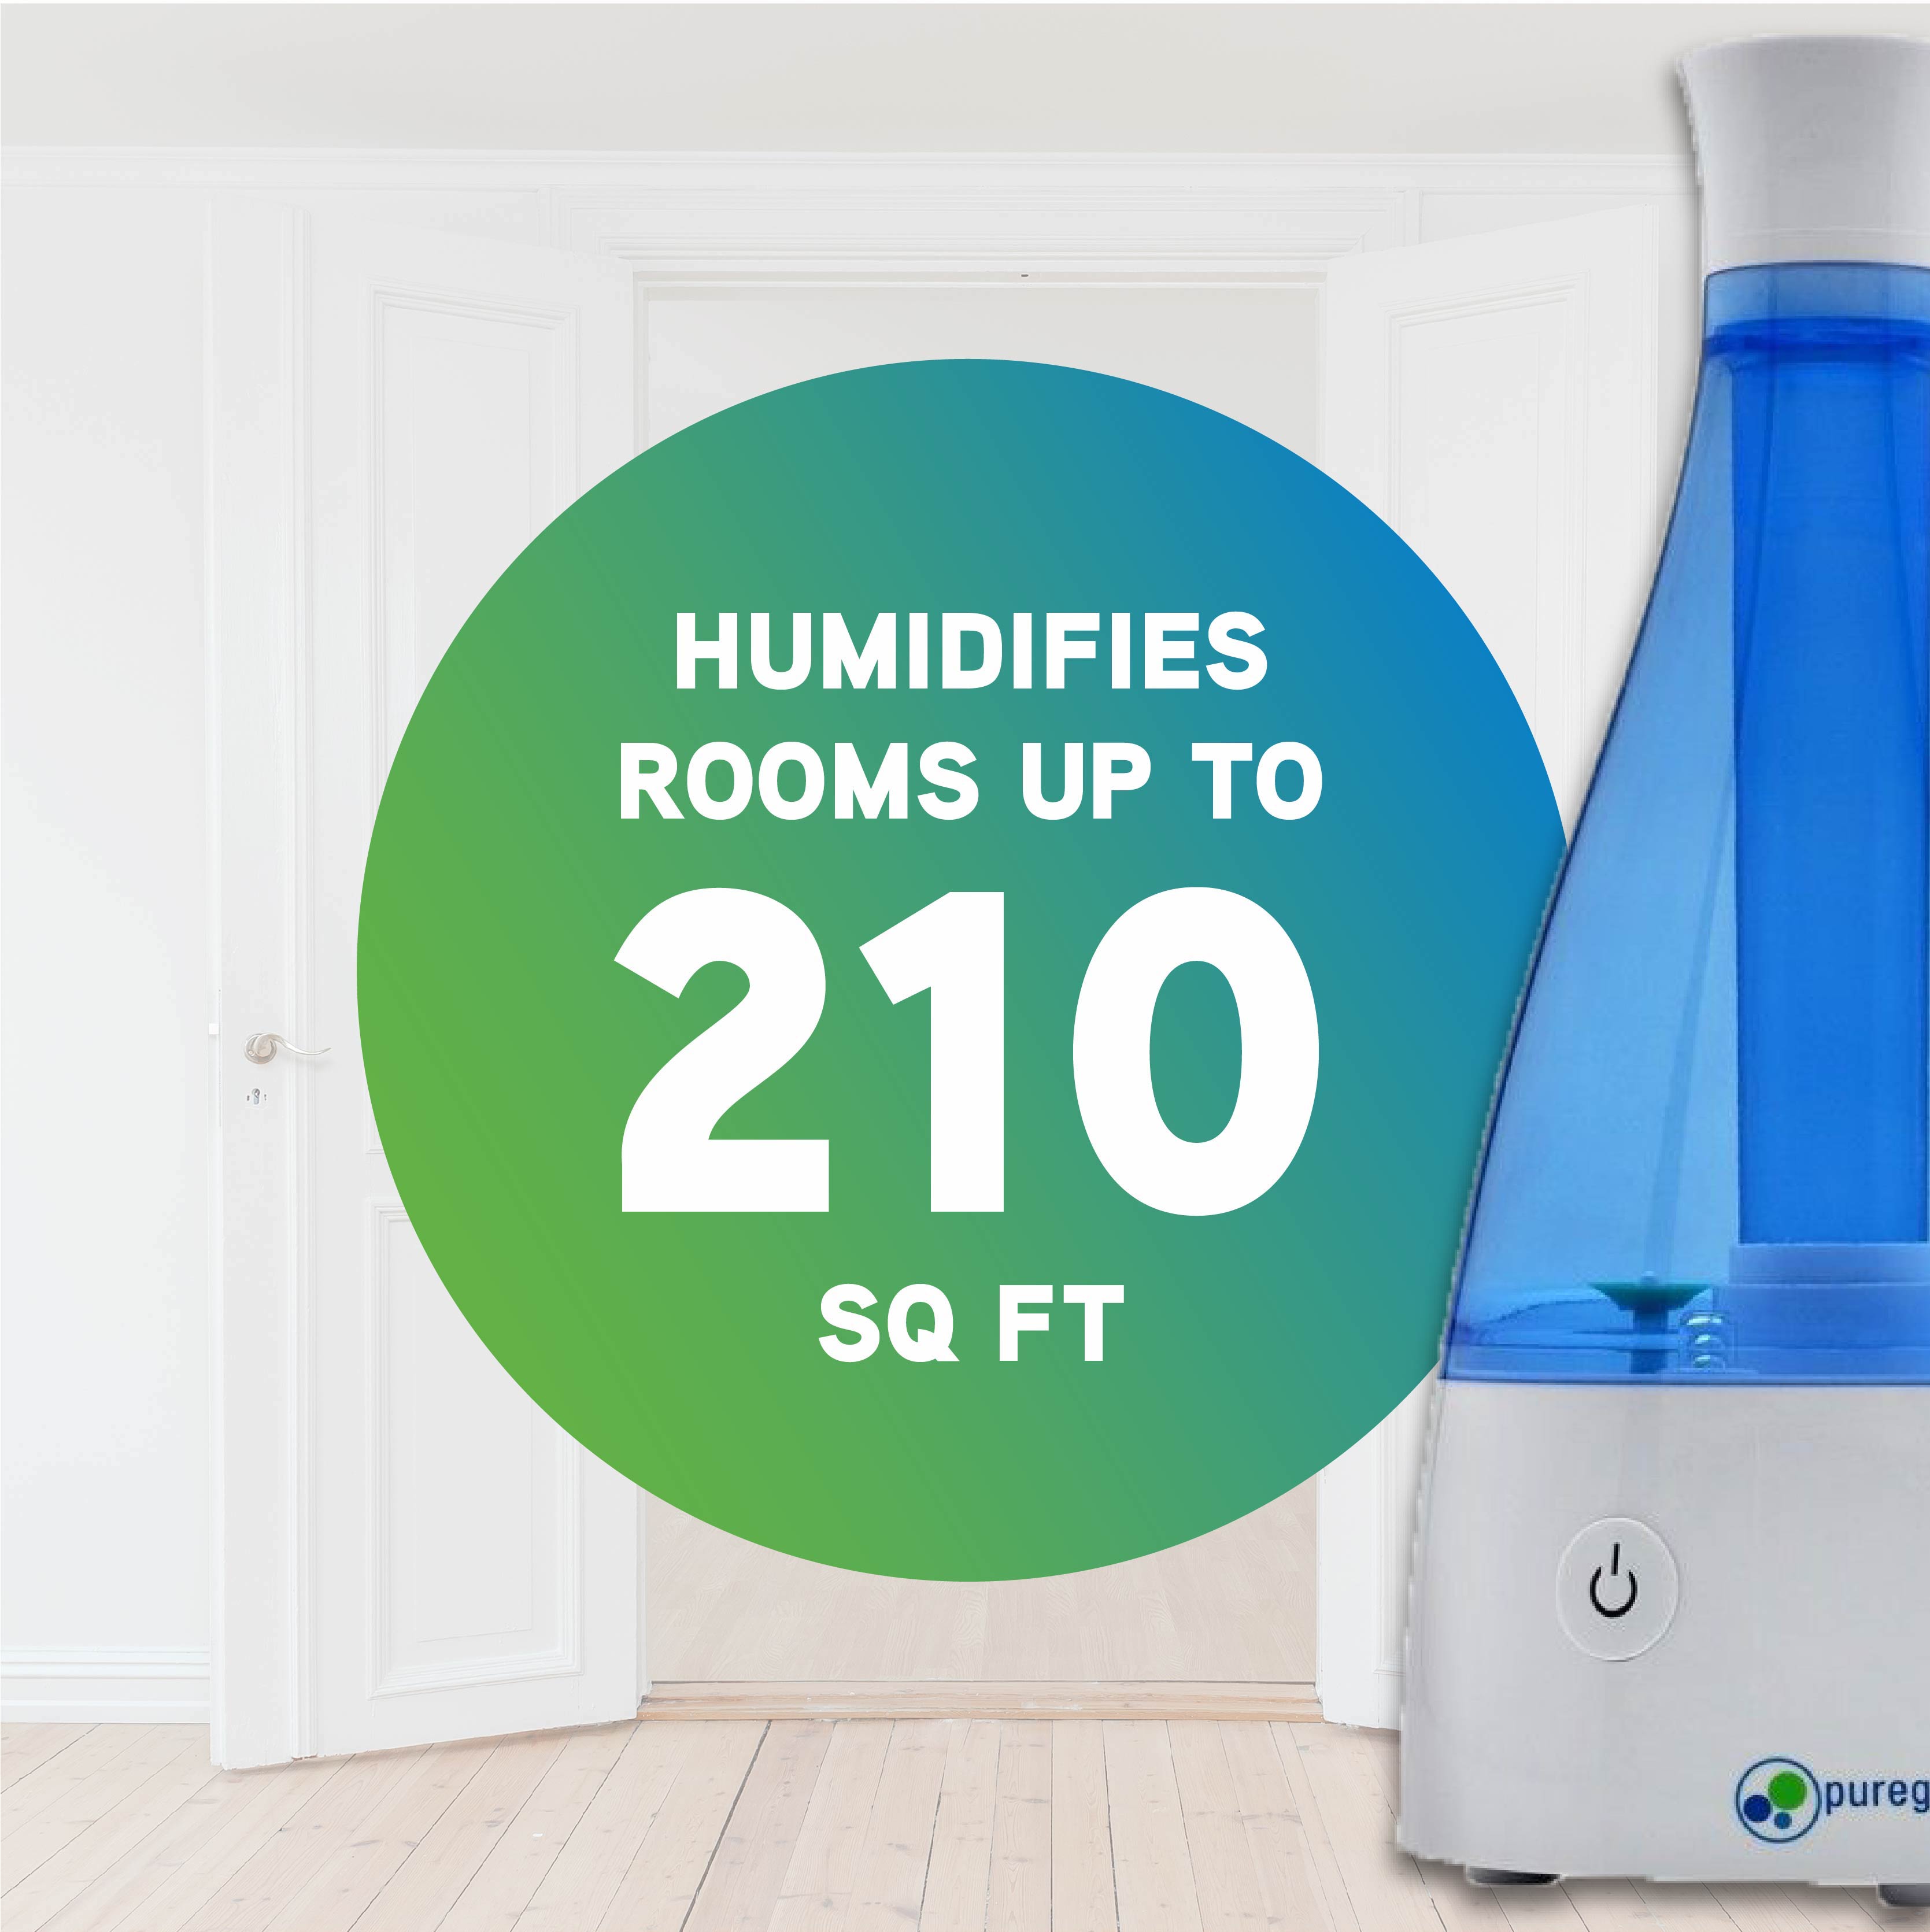 PureGuardian 210 sq. ft. 0.21 Gallon Cool Mist Ultrasonic Humidifier with Night Light, H920BL - image 5 of 10